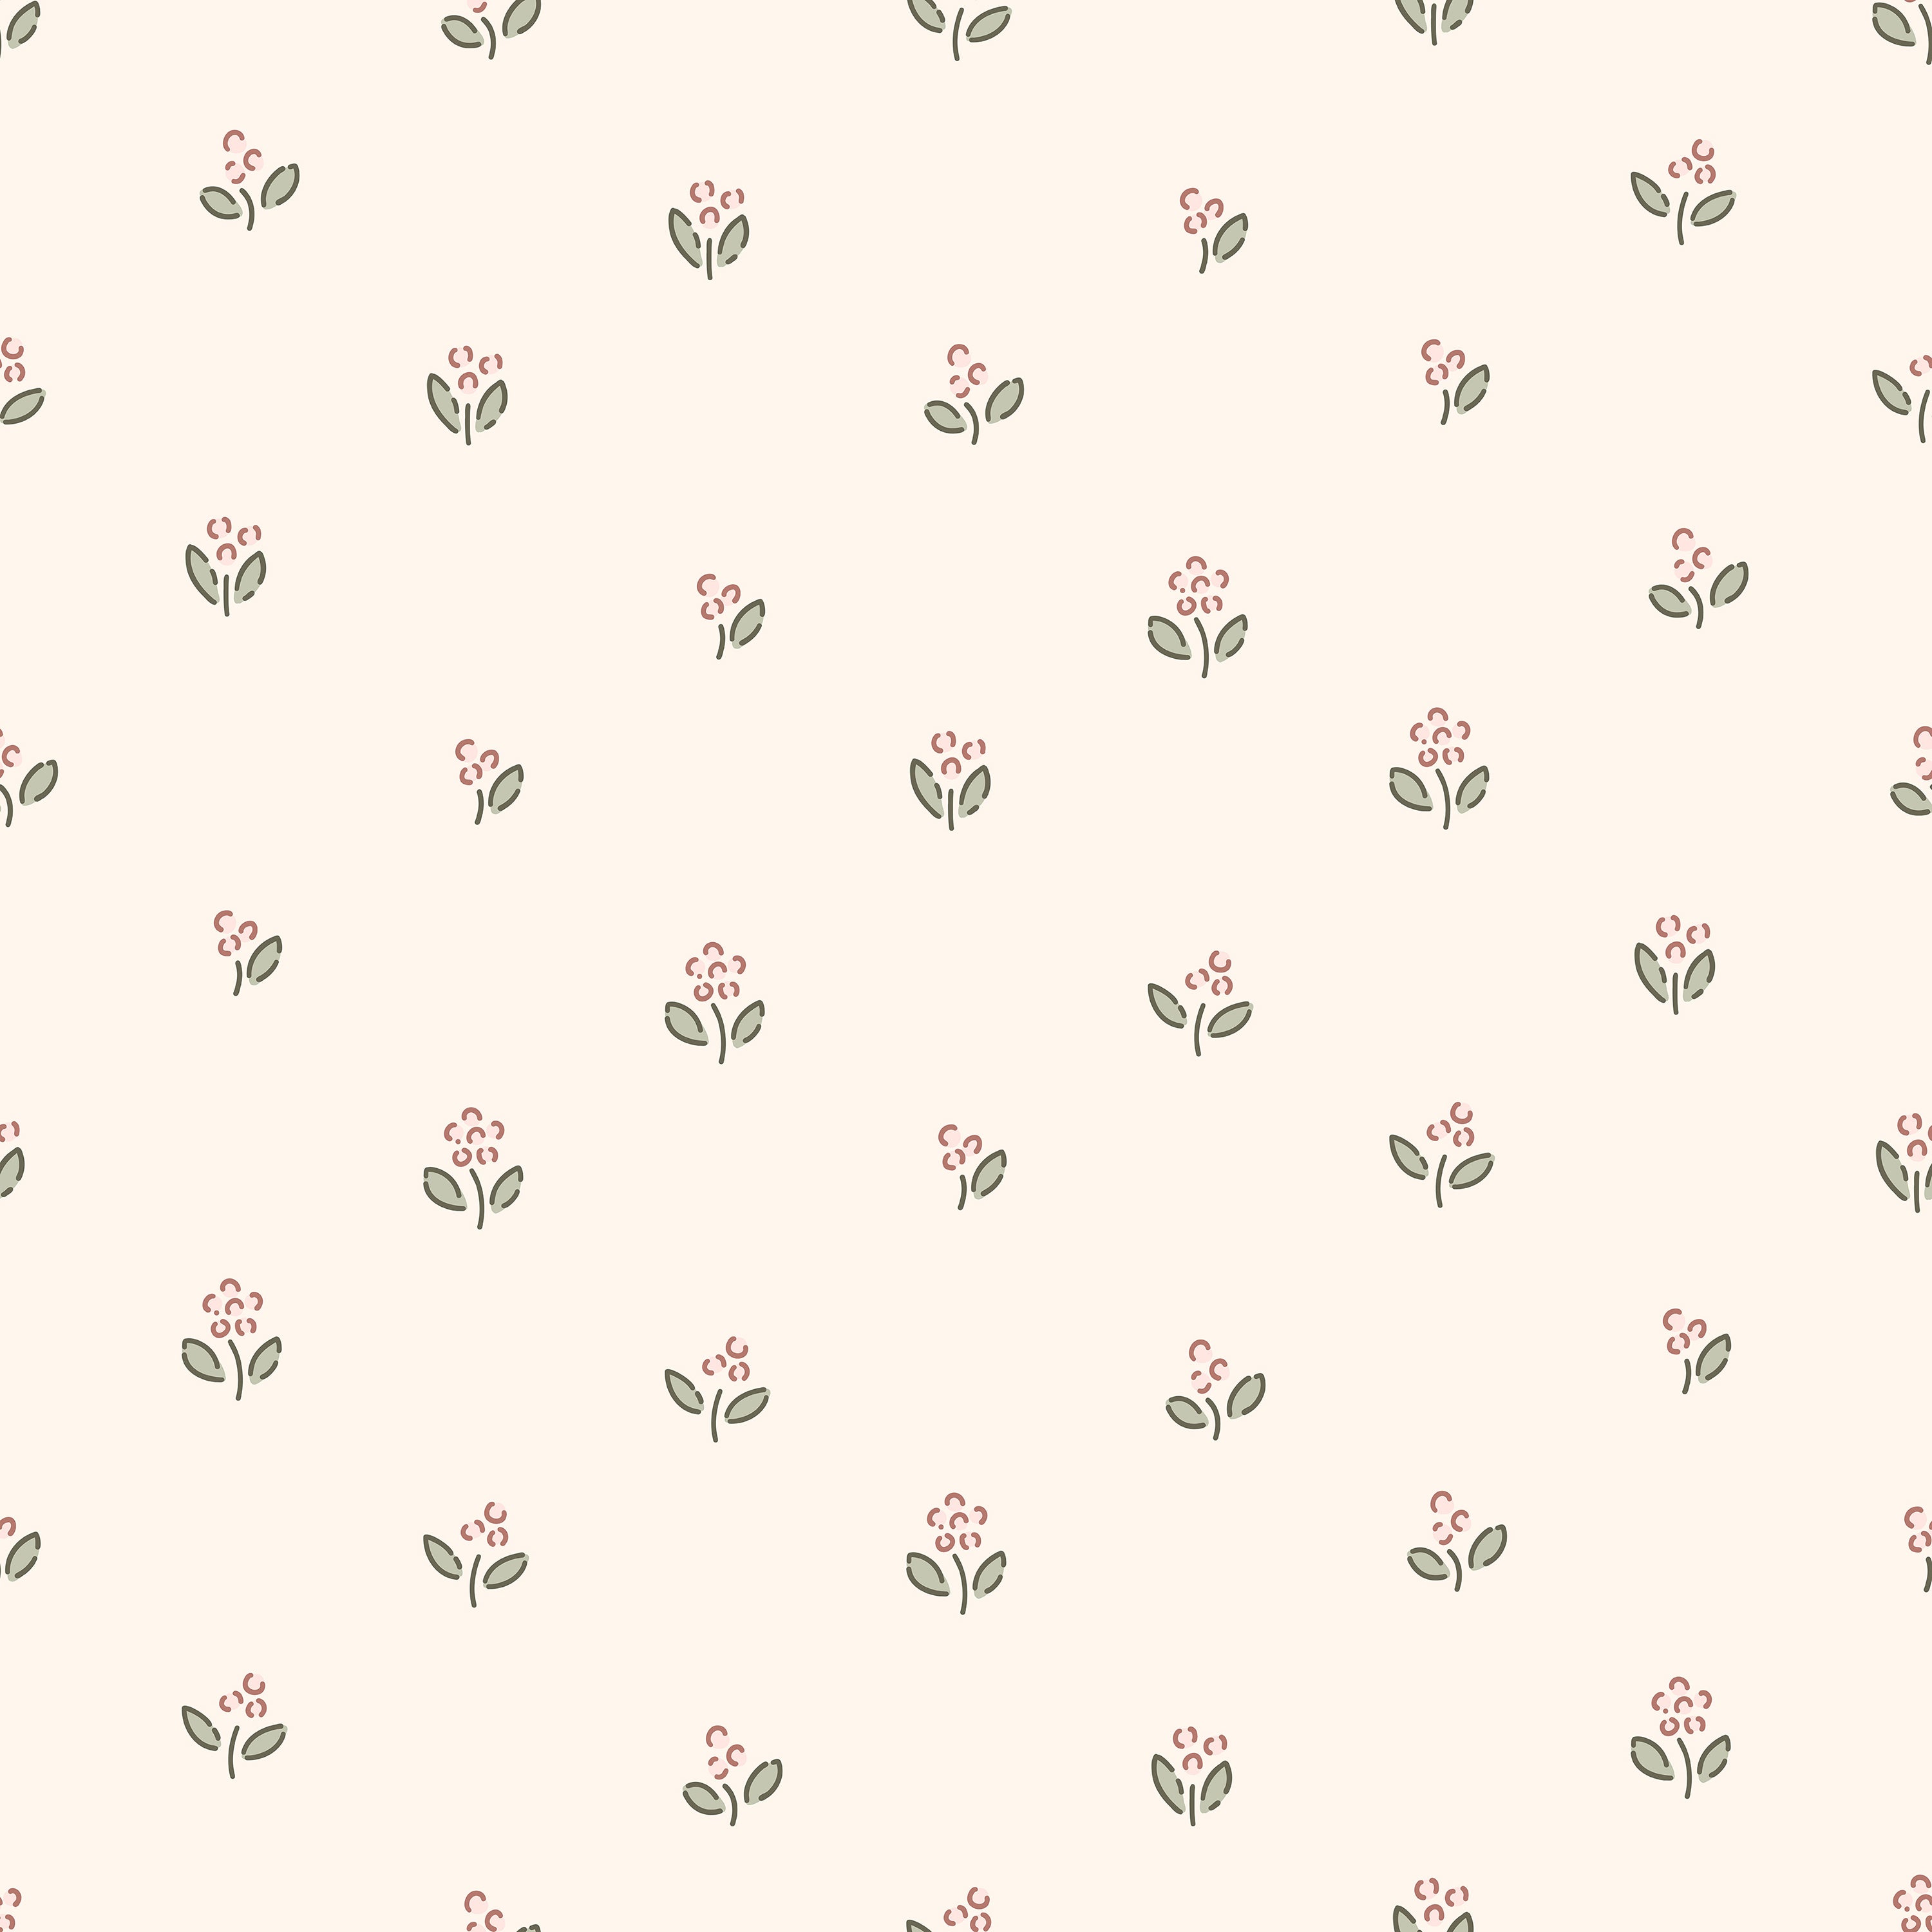 A close-up view of the Mini Floral Joy Wallpaper featuring a delicate pattern of tiny floral clusters in soft pink and green hues on a light beige background, exuding a subtle and charming aesthetic